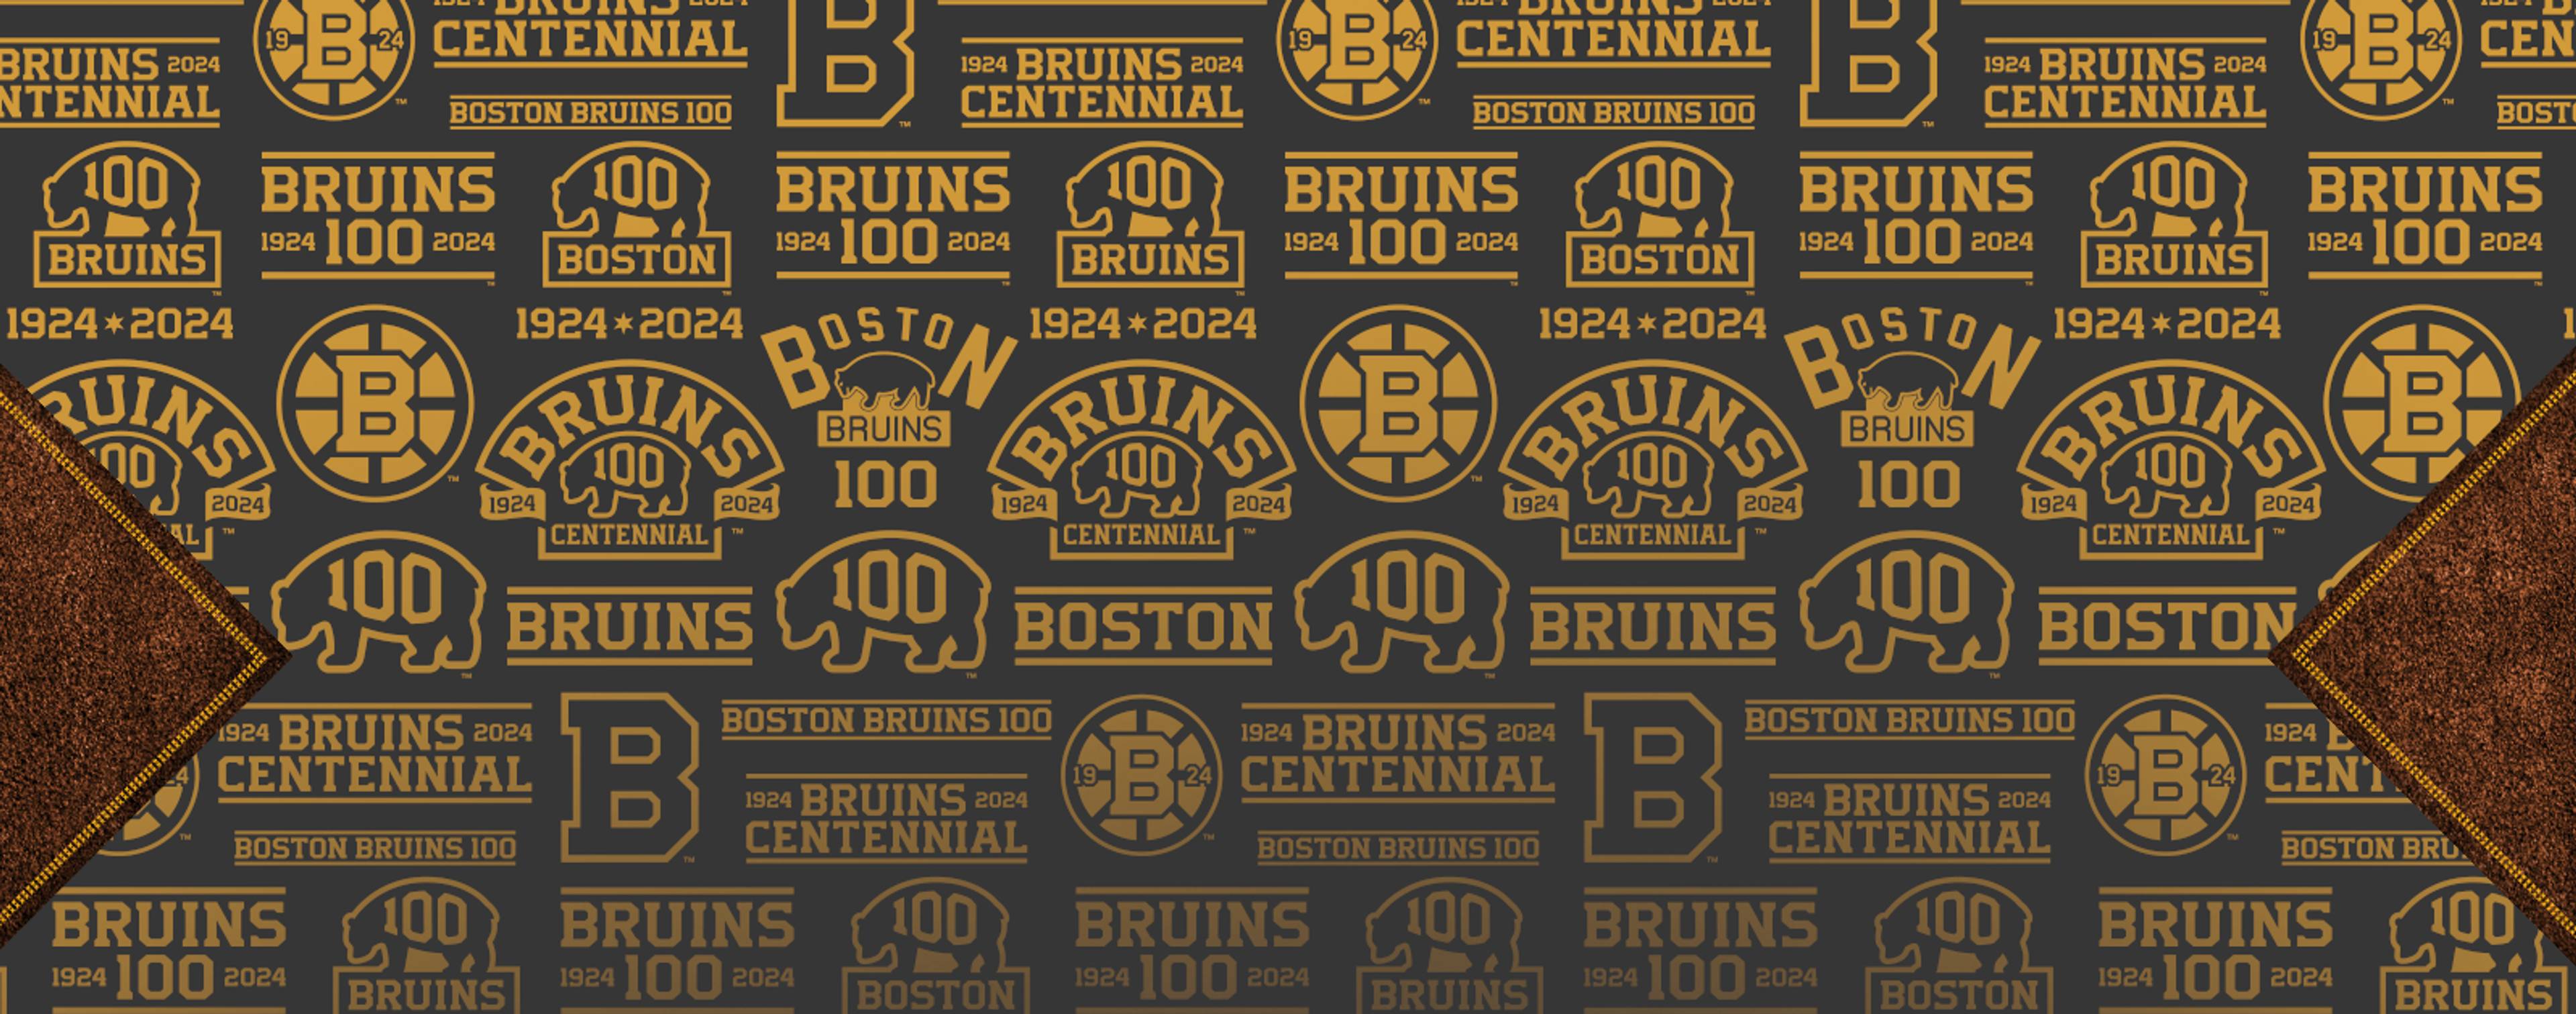 4 Suite Tickets for February 17th Bruins vs. Kings Game featured image